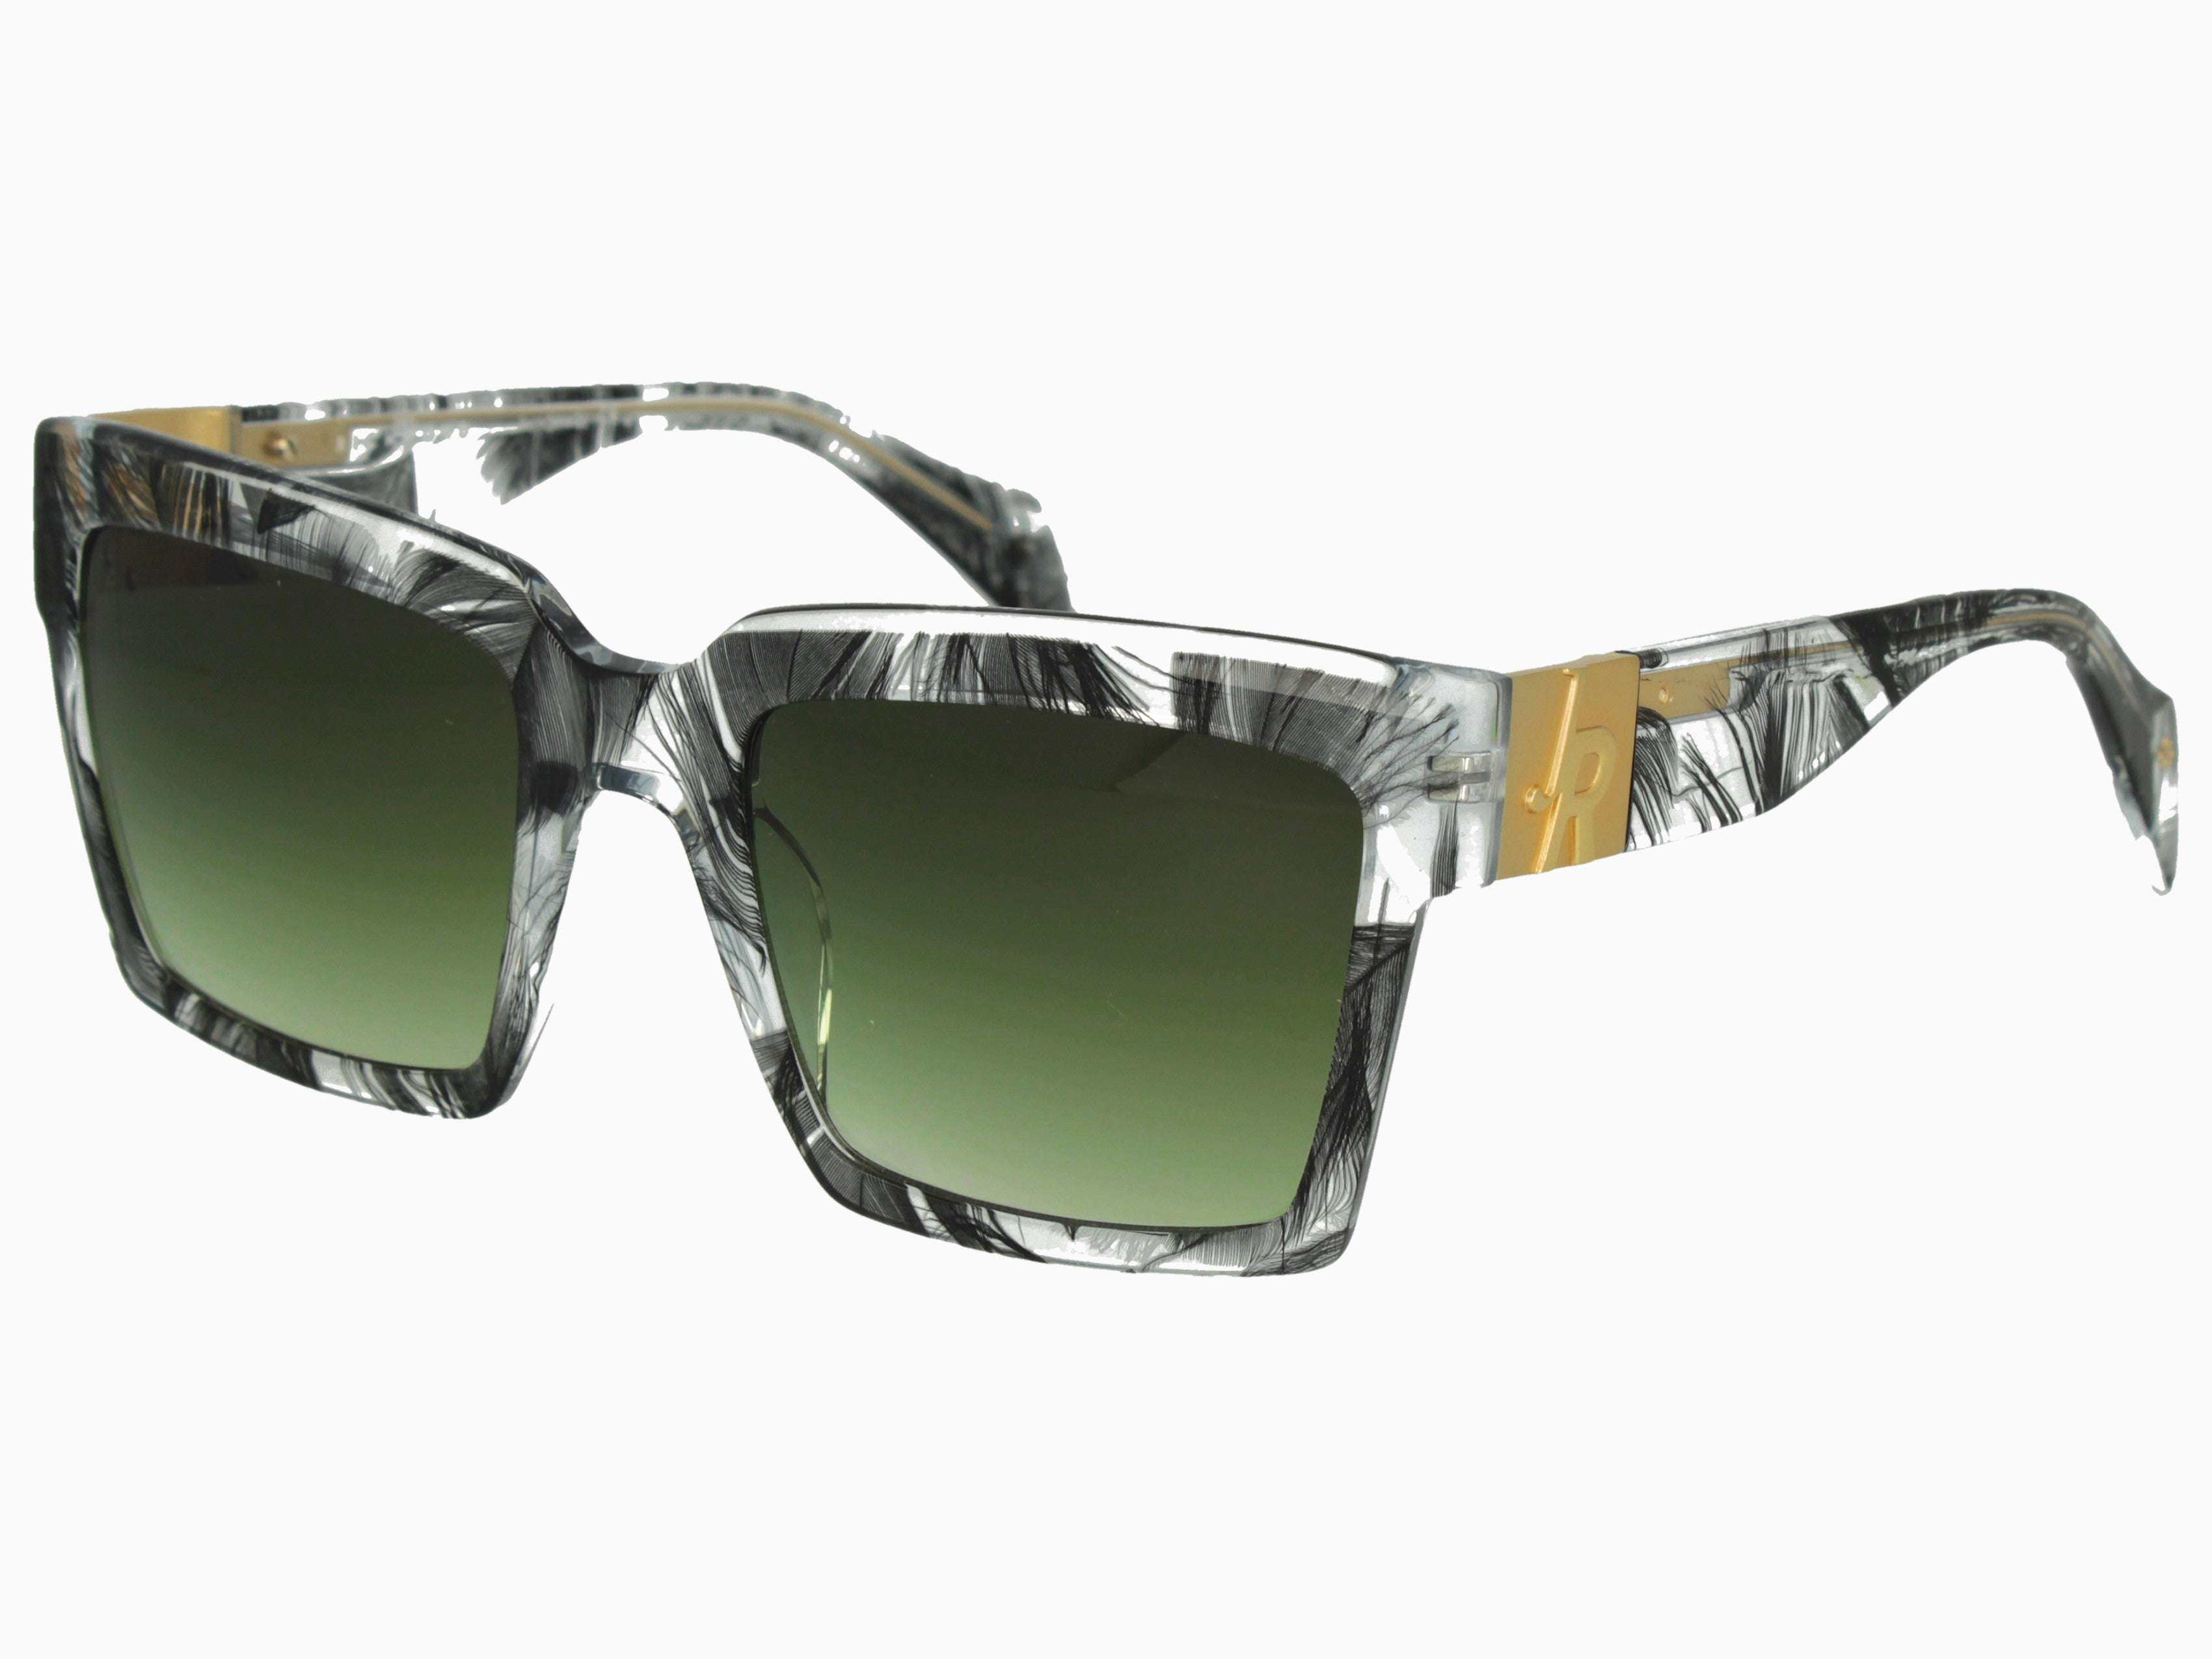 Squared sunglasses with detail and pattern – John Richmond